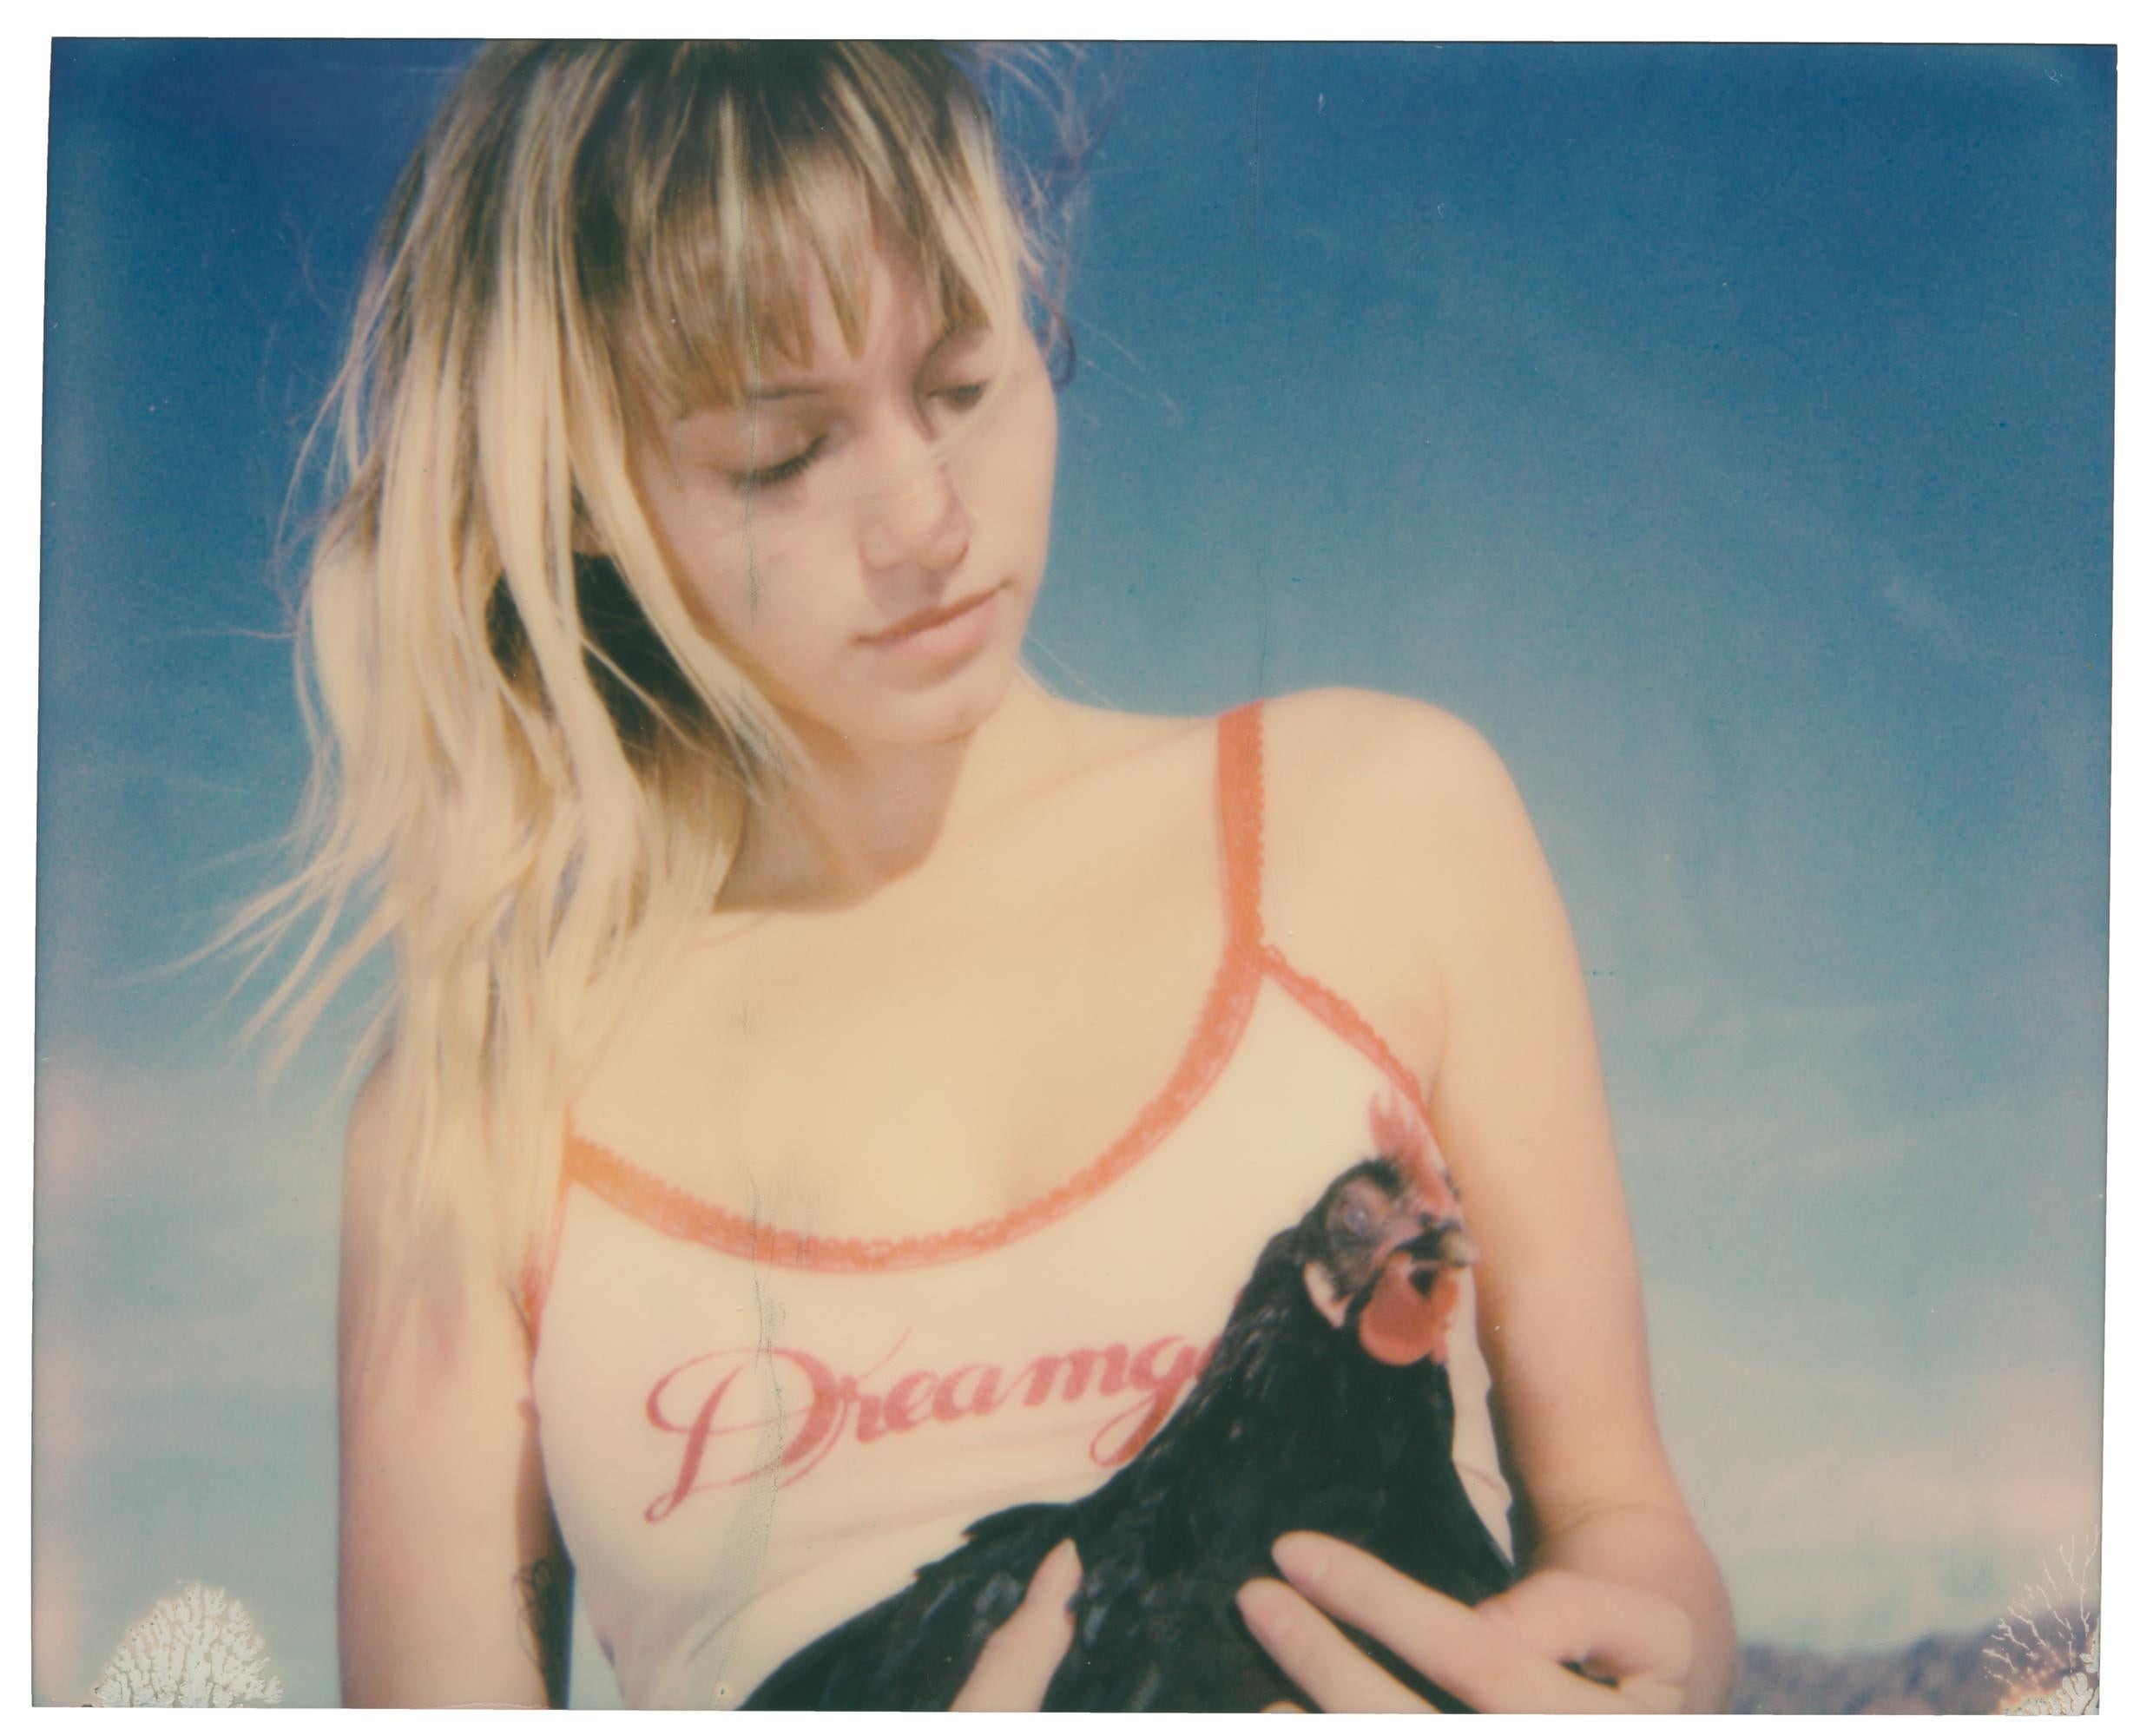 Penny Lane and Dreamgirl (Chicks and Chicks and sometimes Cocks) - Polaroid